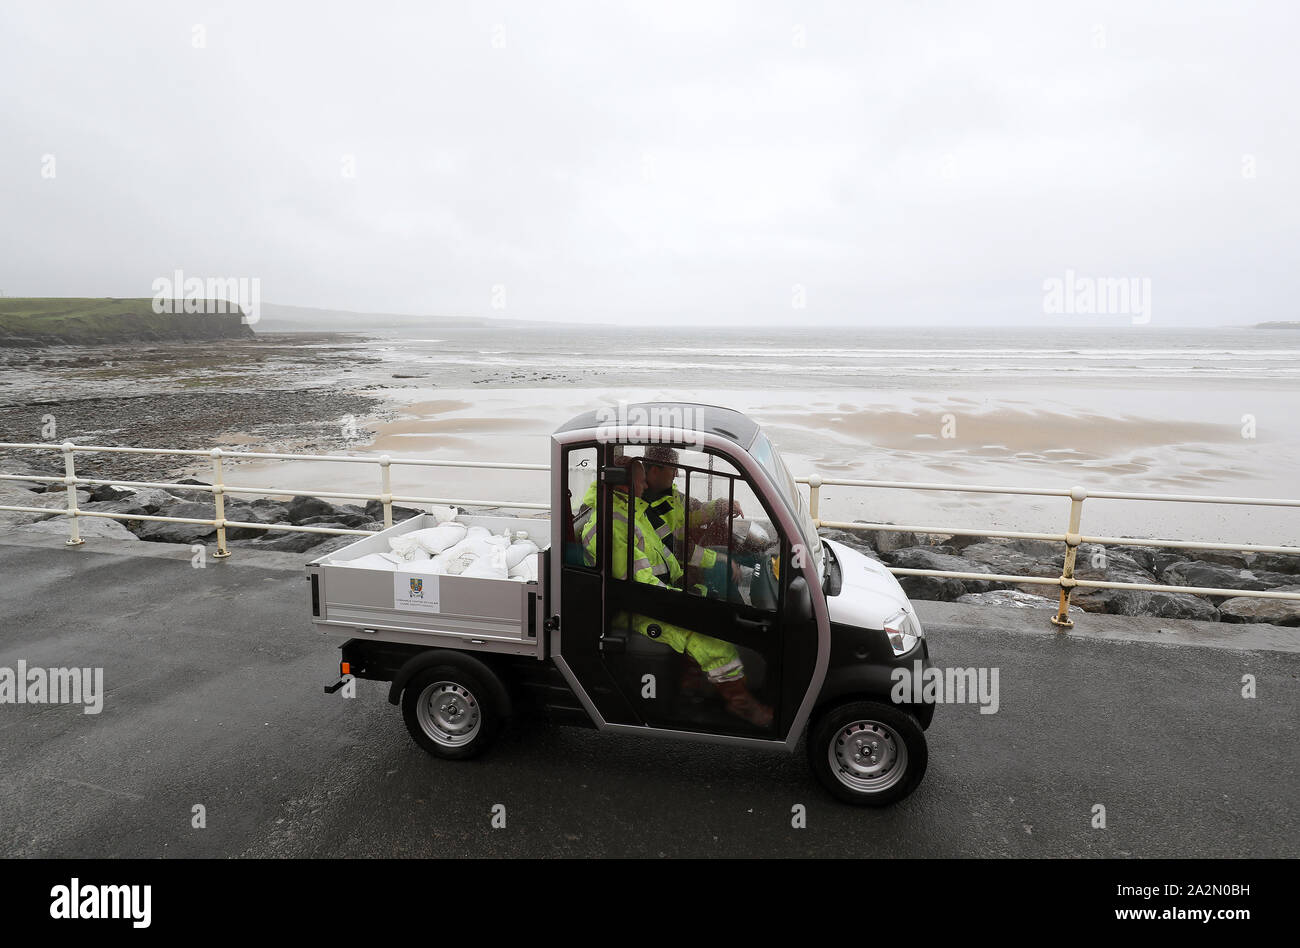 Members of Clare County council deliver sandbags on the sea front in Lahinch, County Clare, on the West Coast of Ireland in preparation for storm Lorenzo, as a status orange wind warning and a yellow rain warning have been issued. Stock Photo